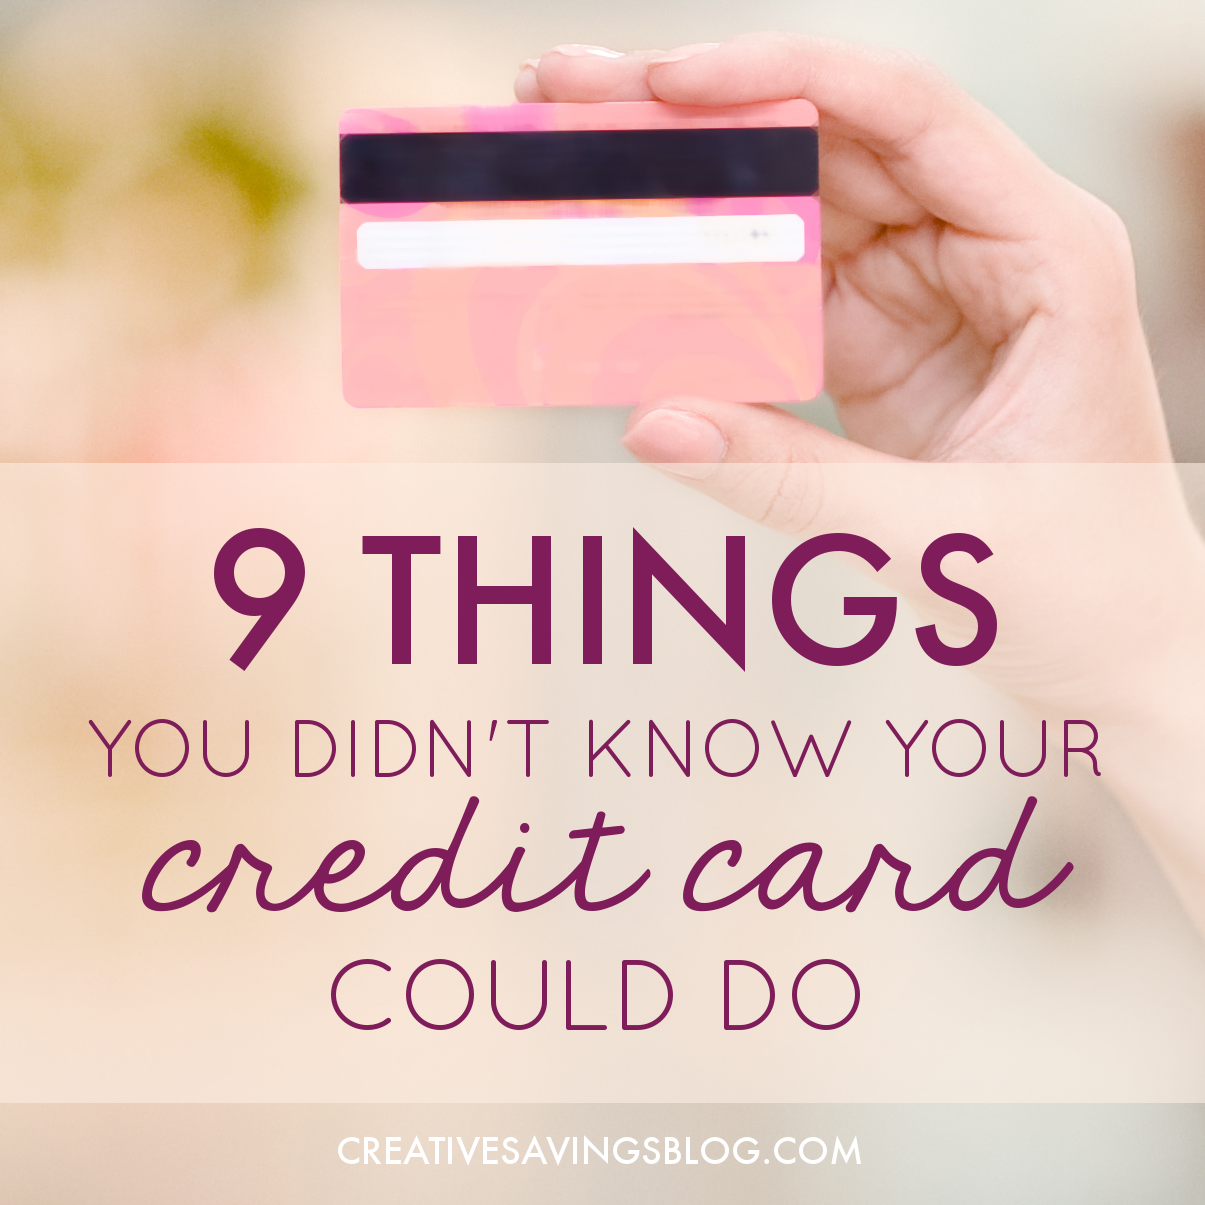 9 Things You Didn’t Know Your Credit Card Could Do